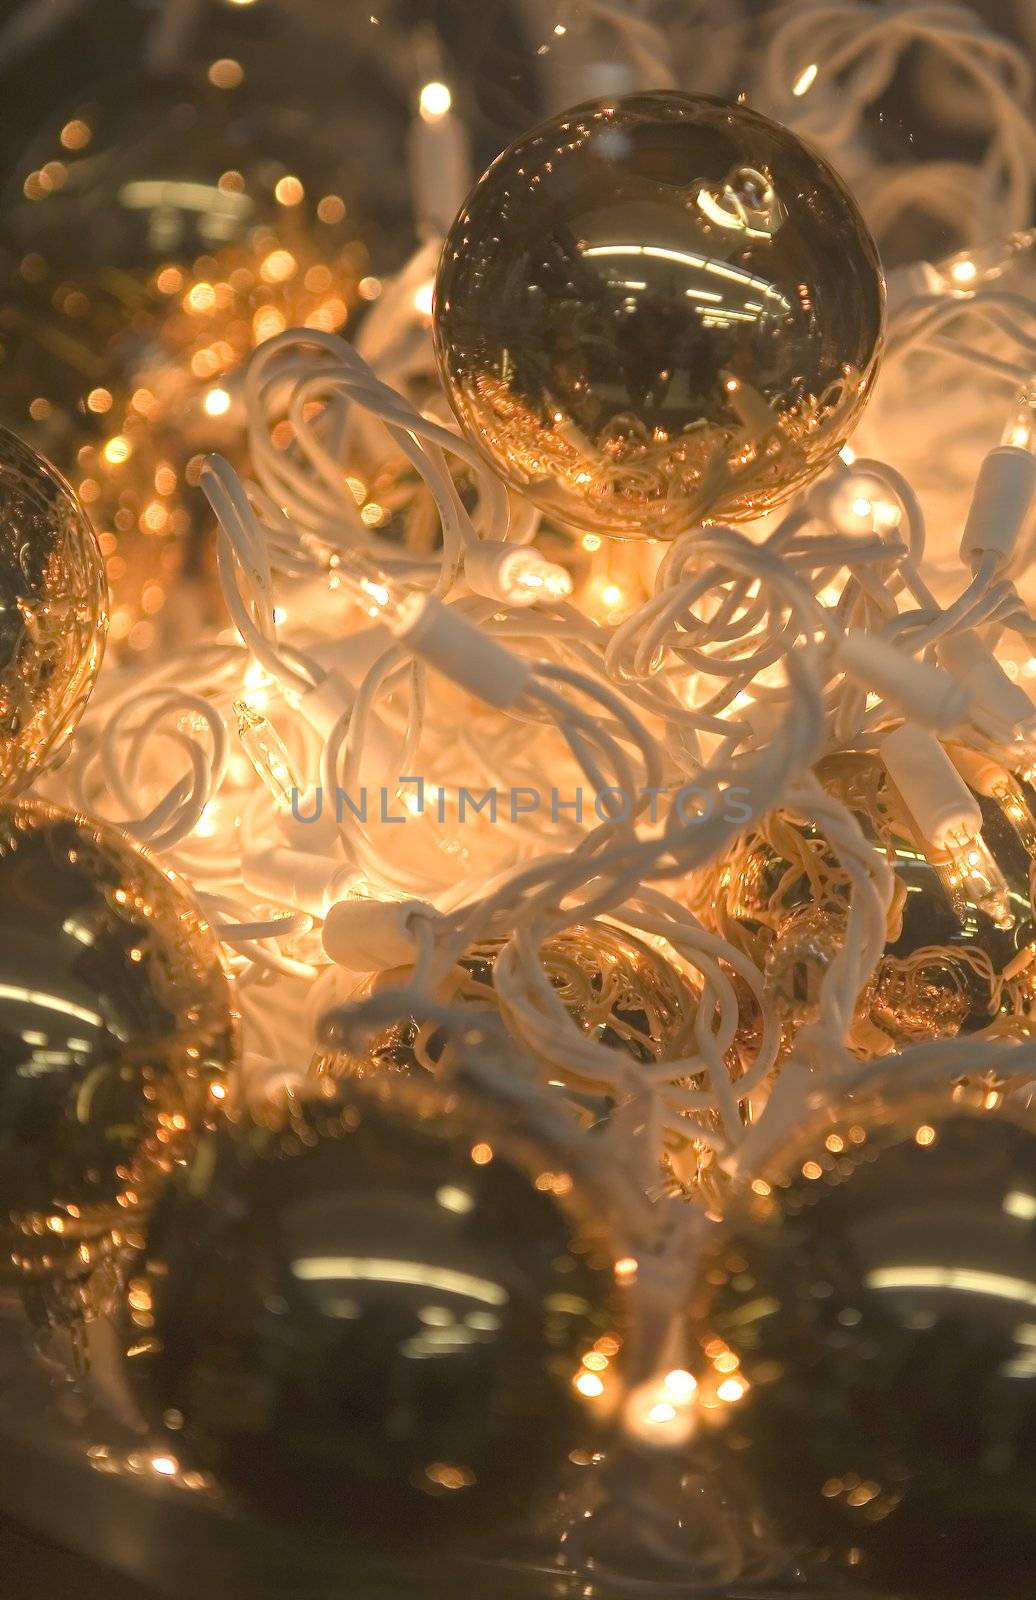 Christmas Balls laying on a string of Lights by KevinPanizza